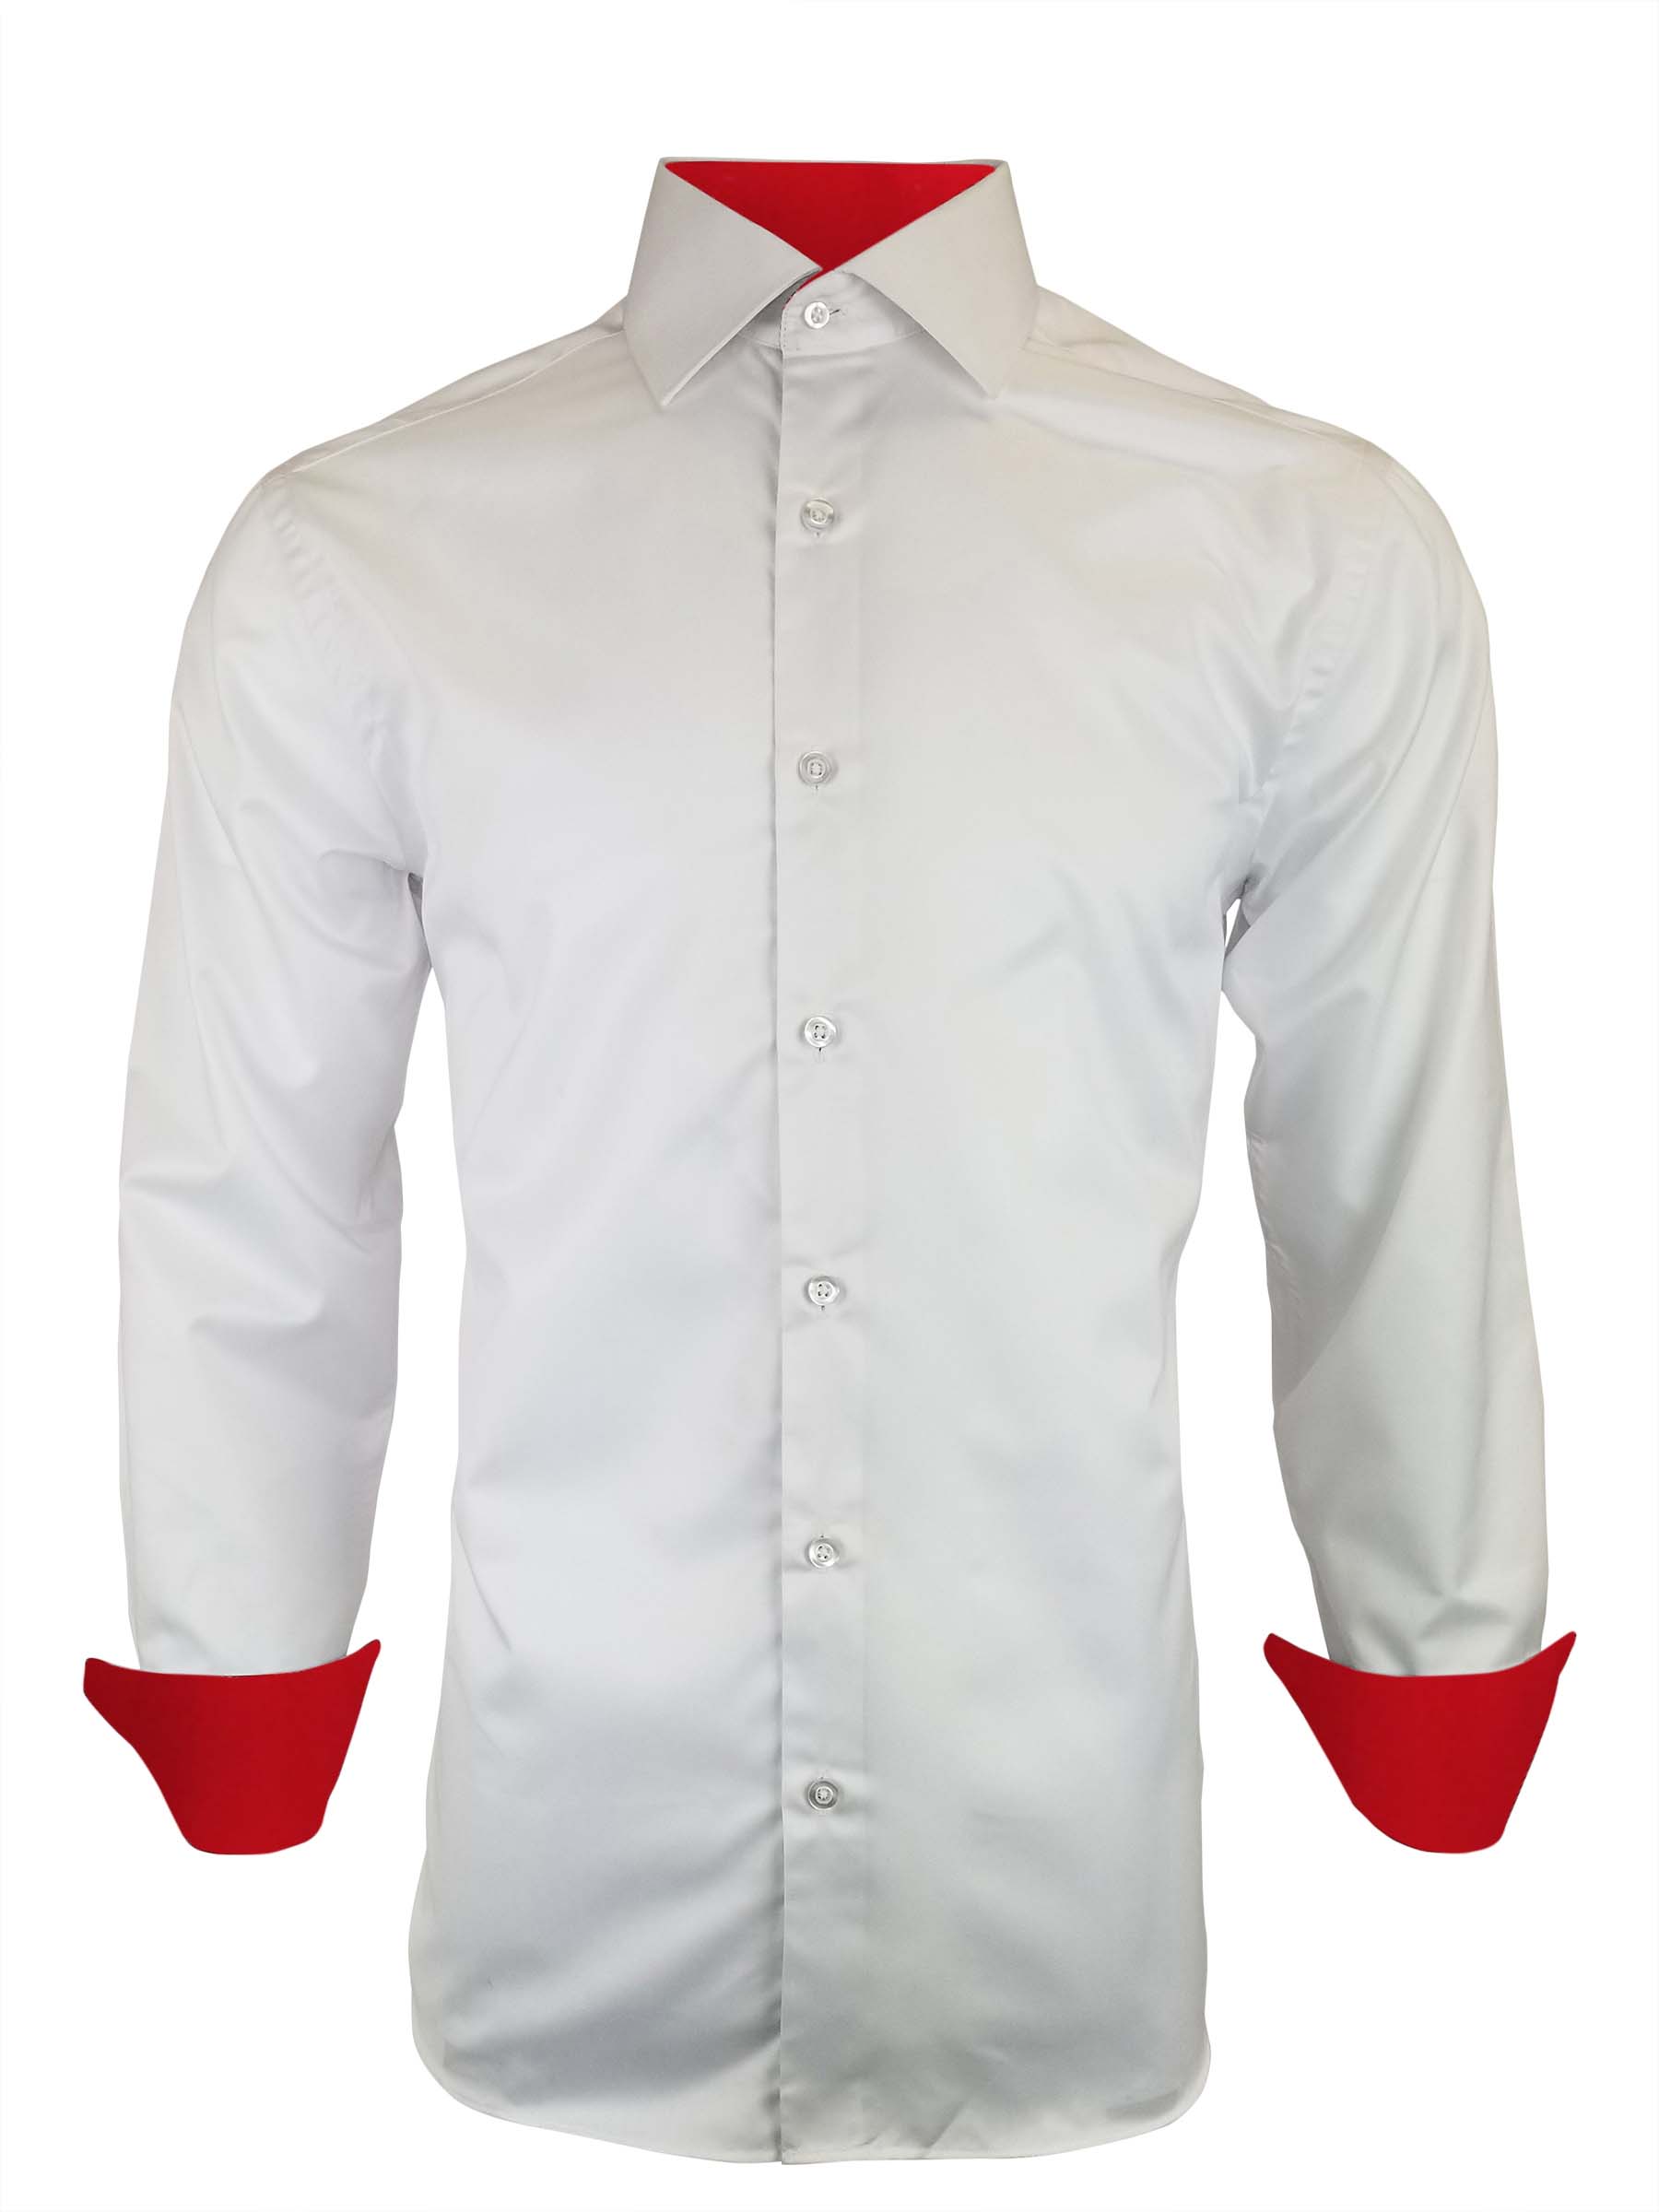 Men's White with Red PC Contrast Shirt - Long Sleeve - Uniform Edit